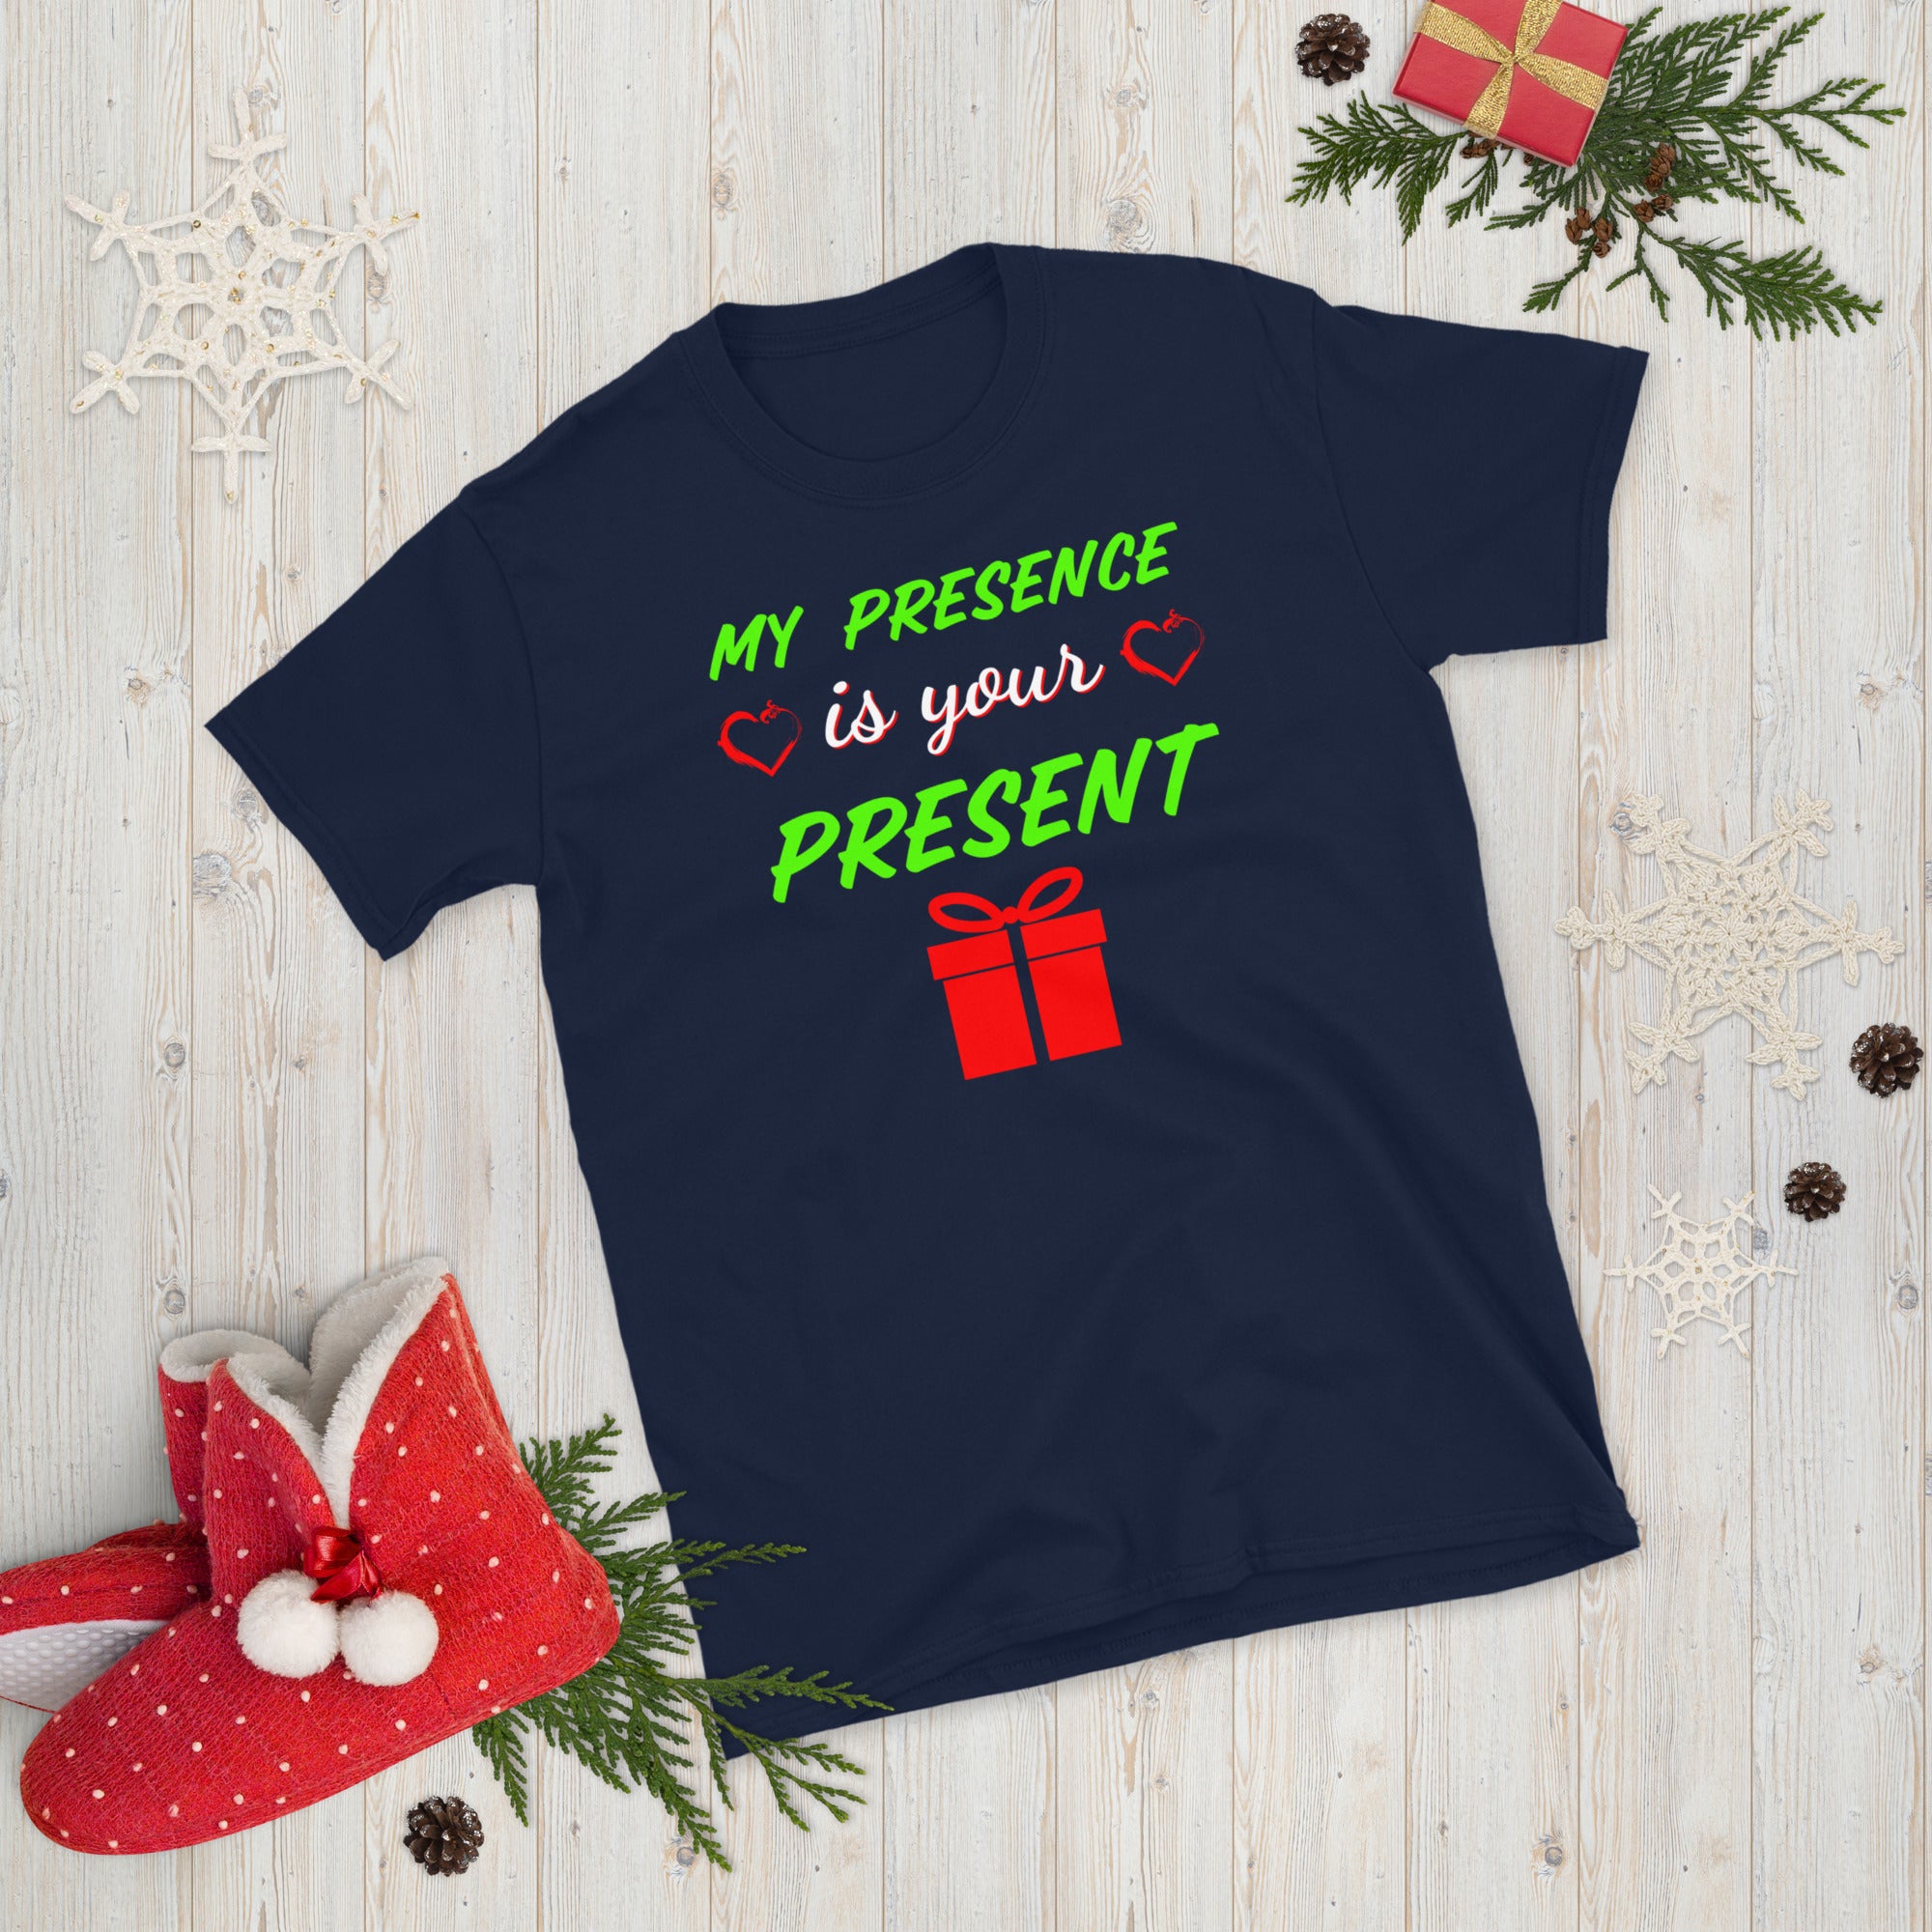 My Presence Is Your Present, Christmas Holiday Shirt, Funny Christmas Shirt, Christmas Shirts, Christmas Gifts For Couples, Xmas Shirts